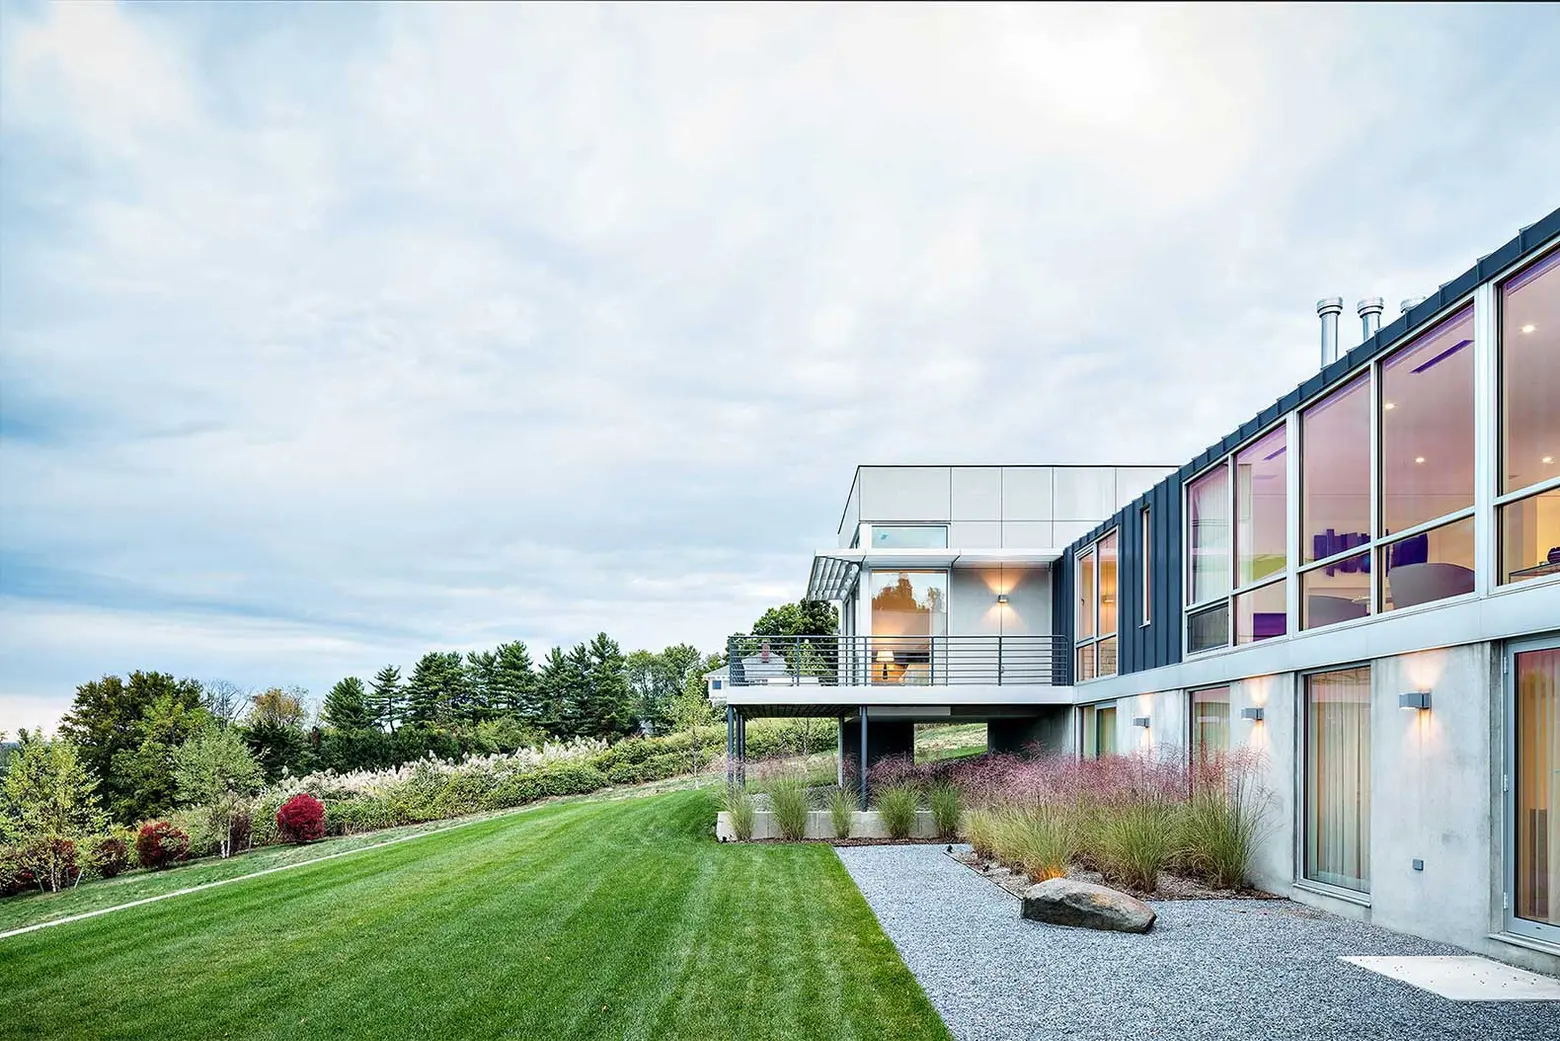 Workshop/APD, crafted modern home, Hudson Views, renovated barn, Andrew Kotchen, Briarcliff Manor, glazed facade, Hudson river